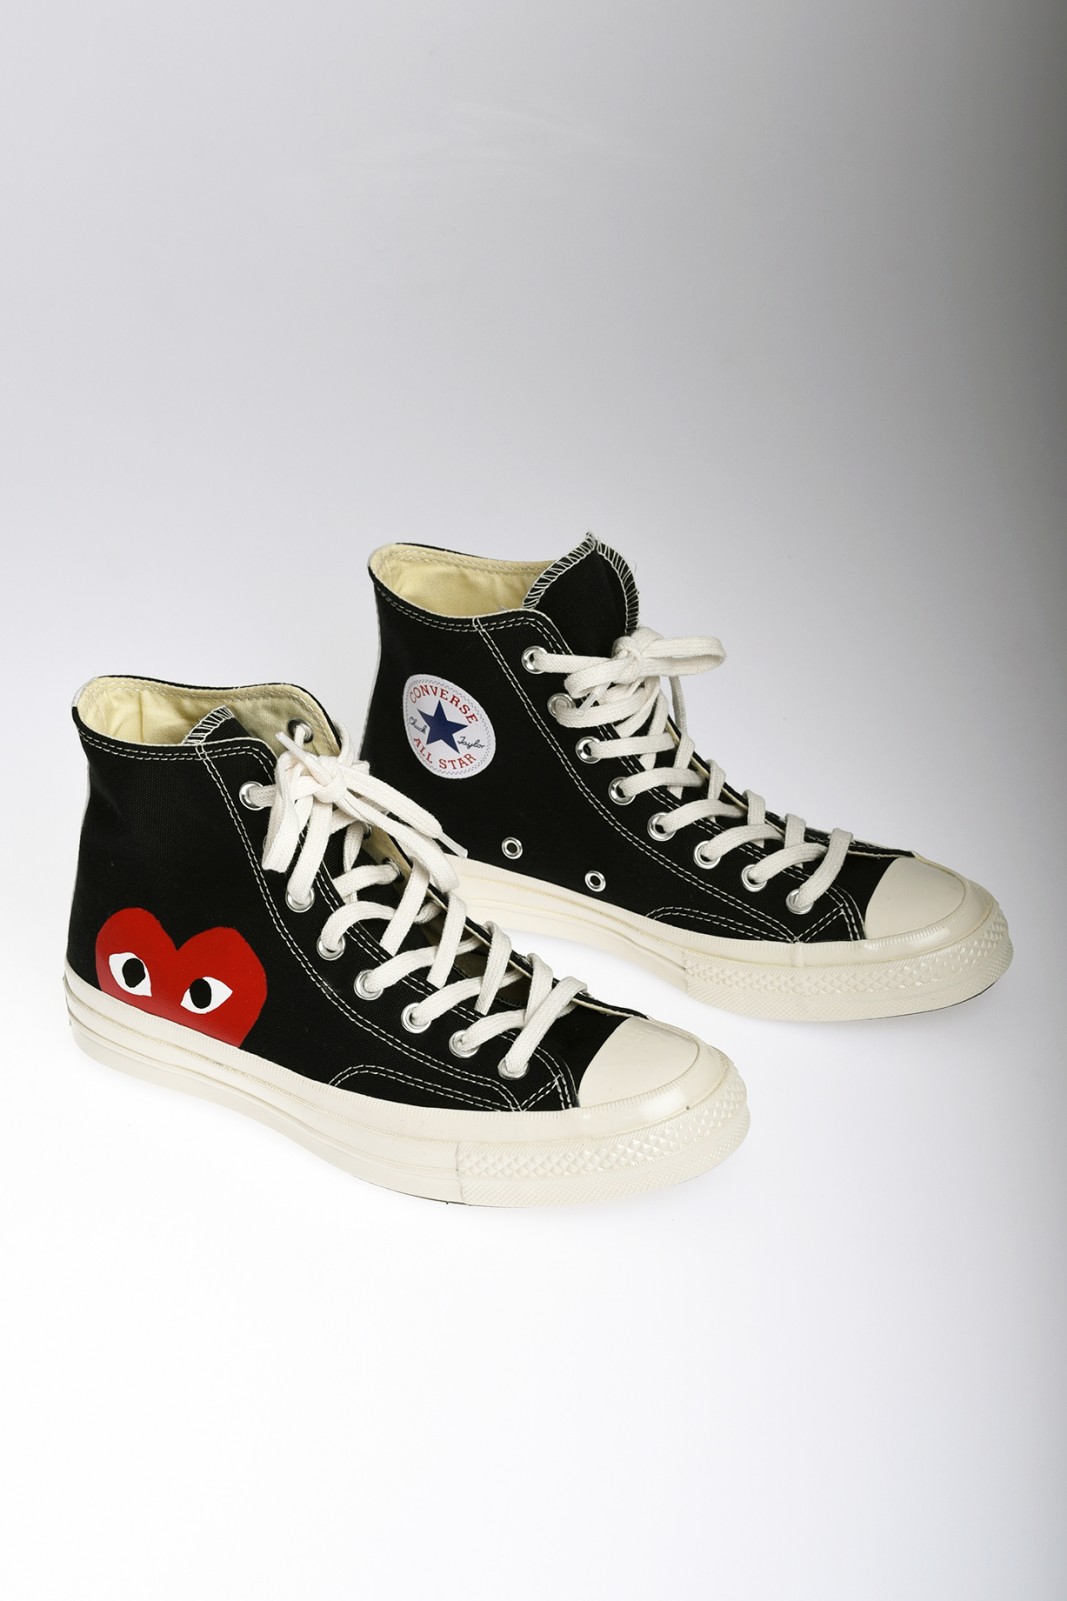 COMME DES GARCONS Play Converse Chuck Taylor All Star black high sneakers